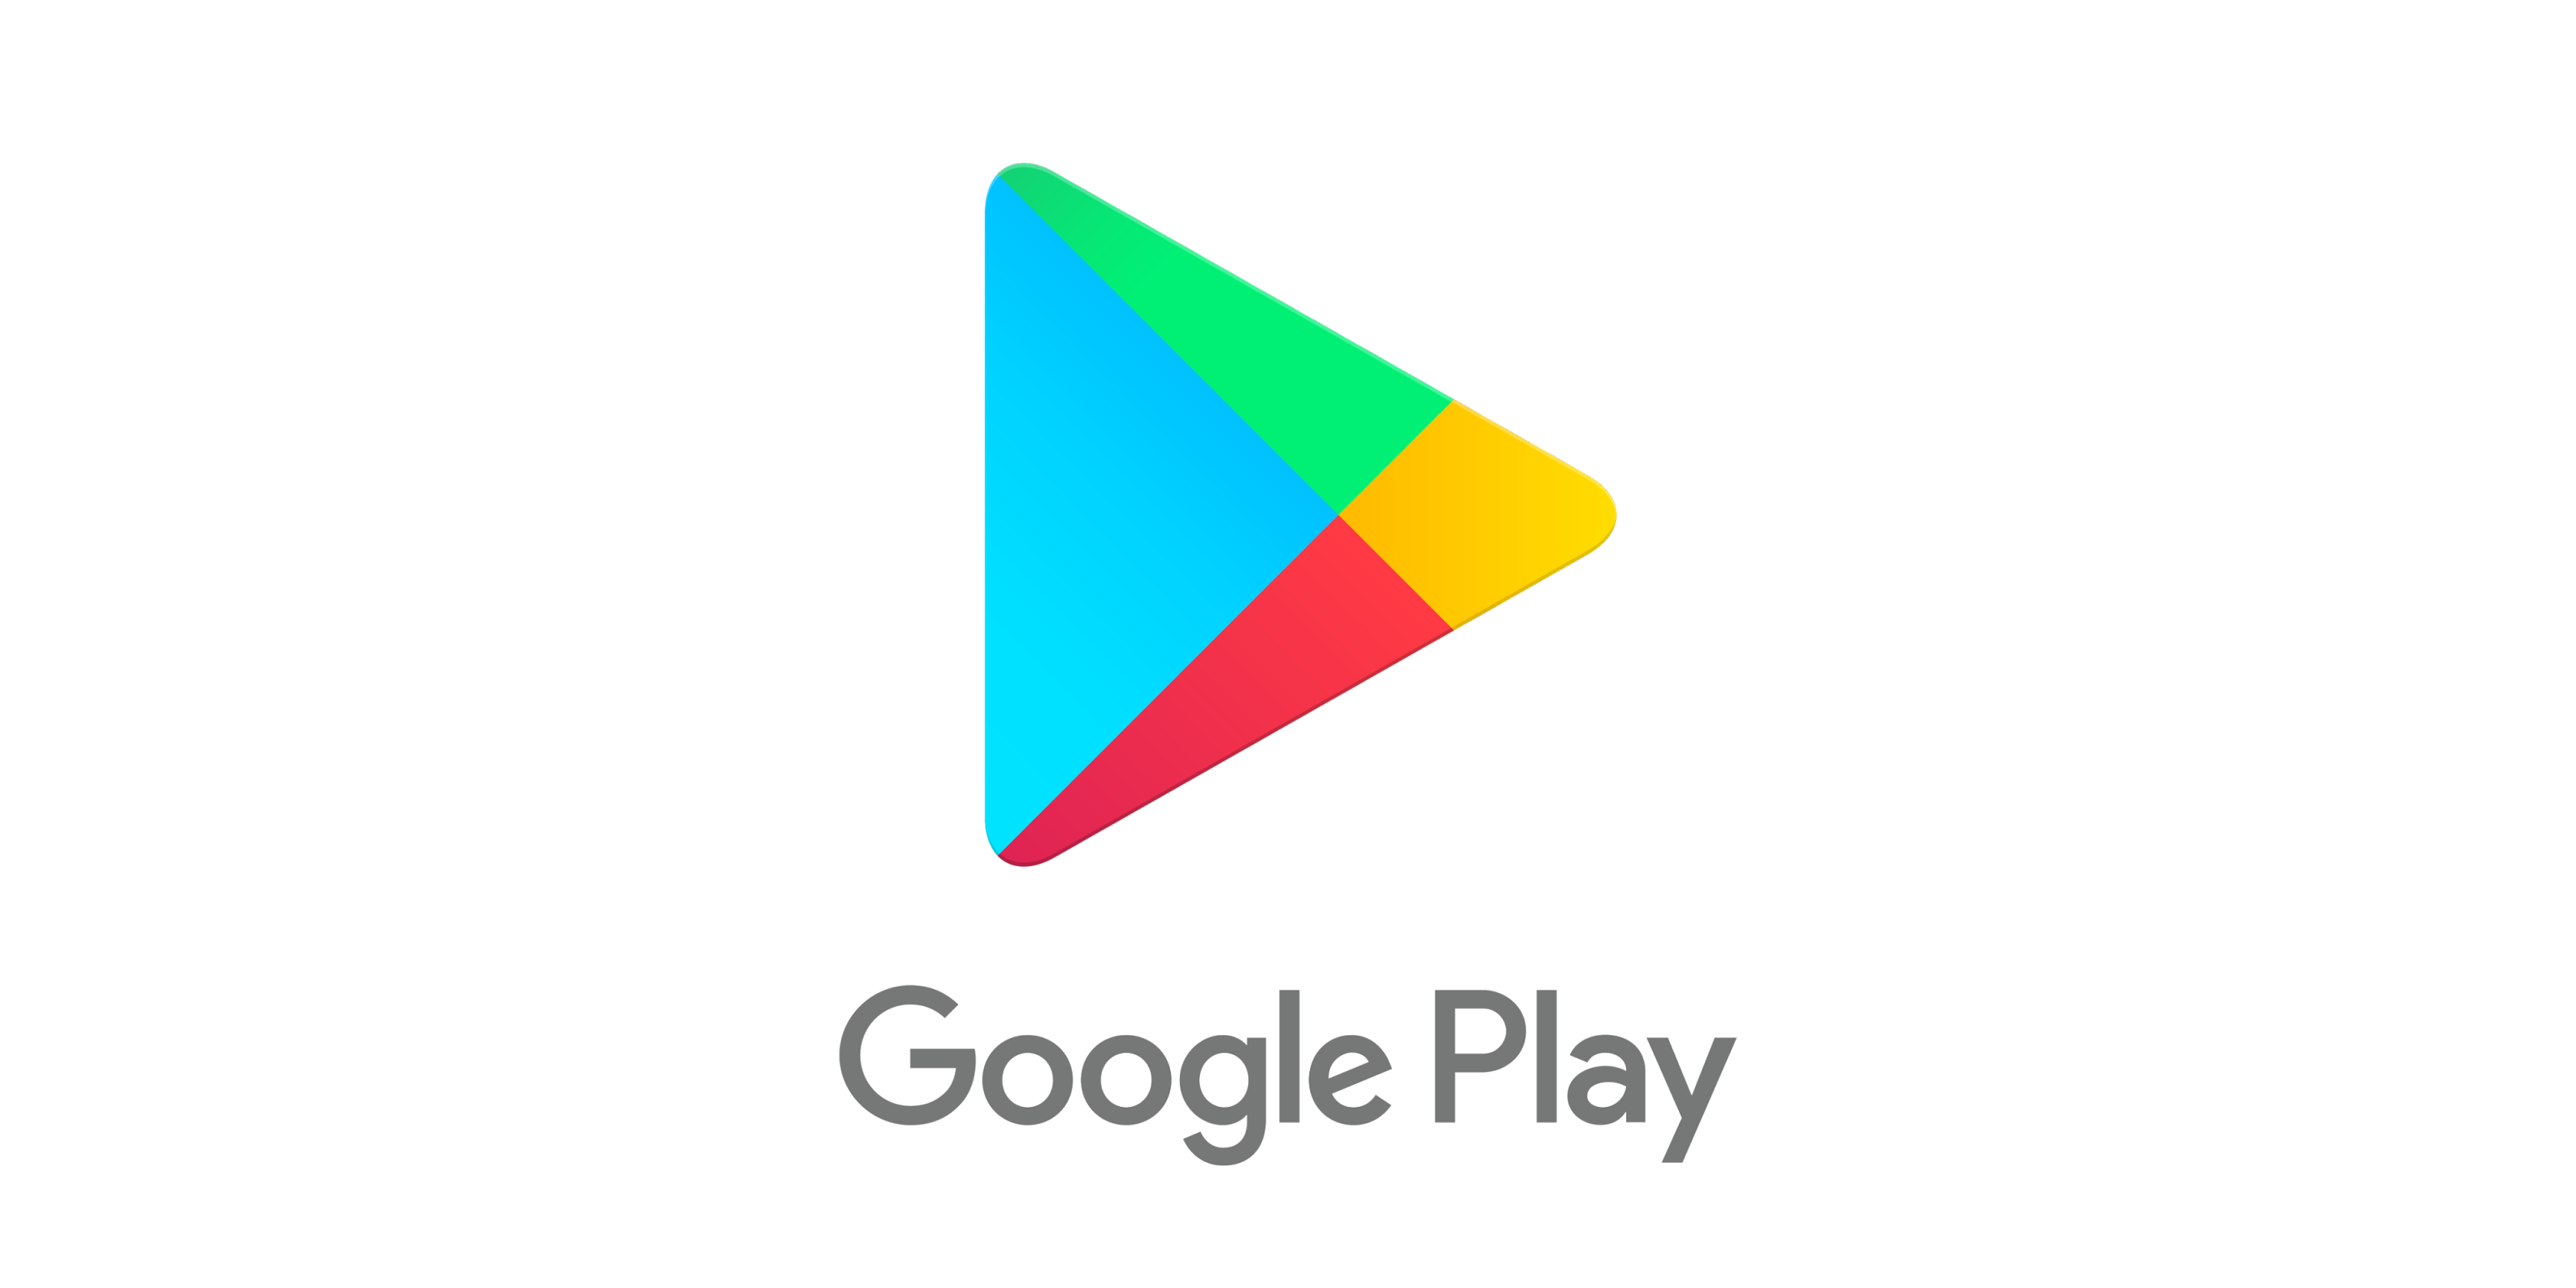 how download adnriod application from play store